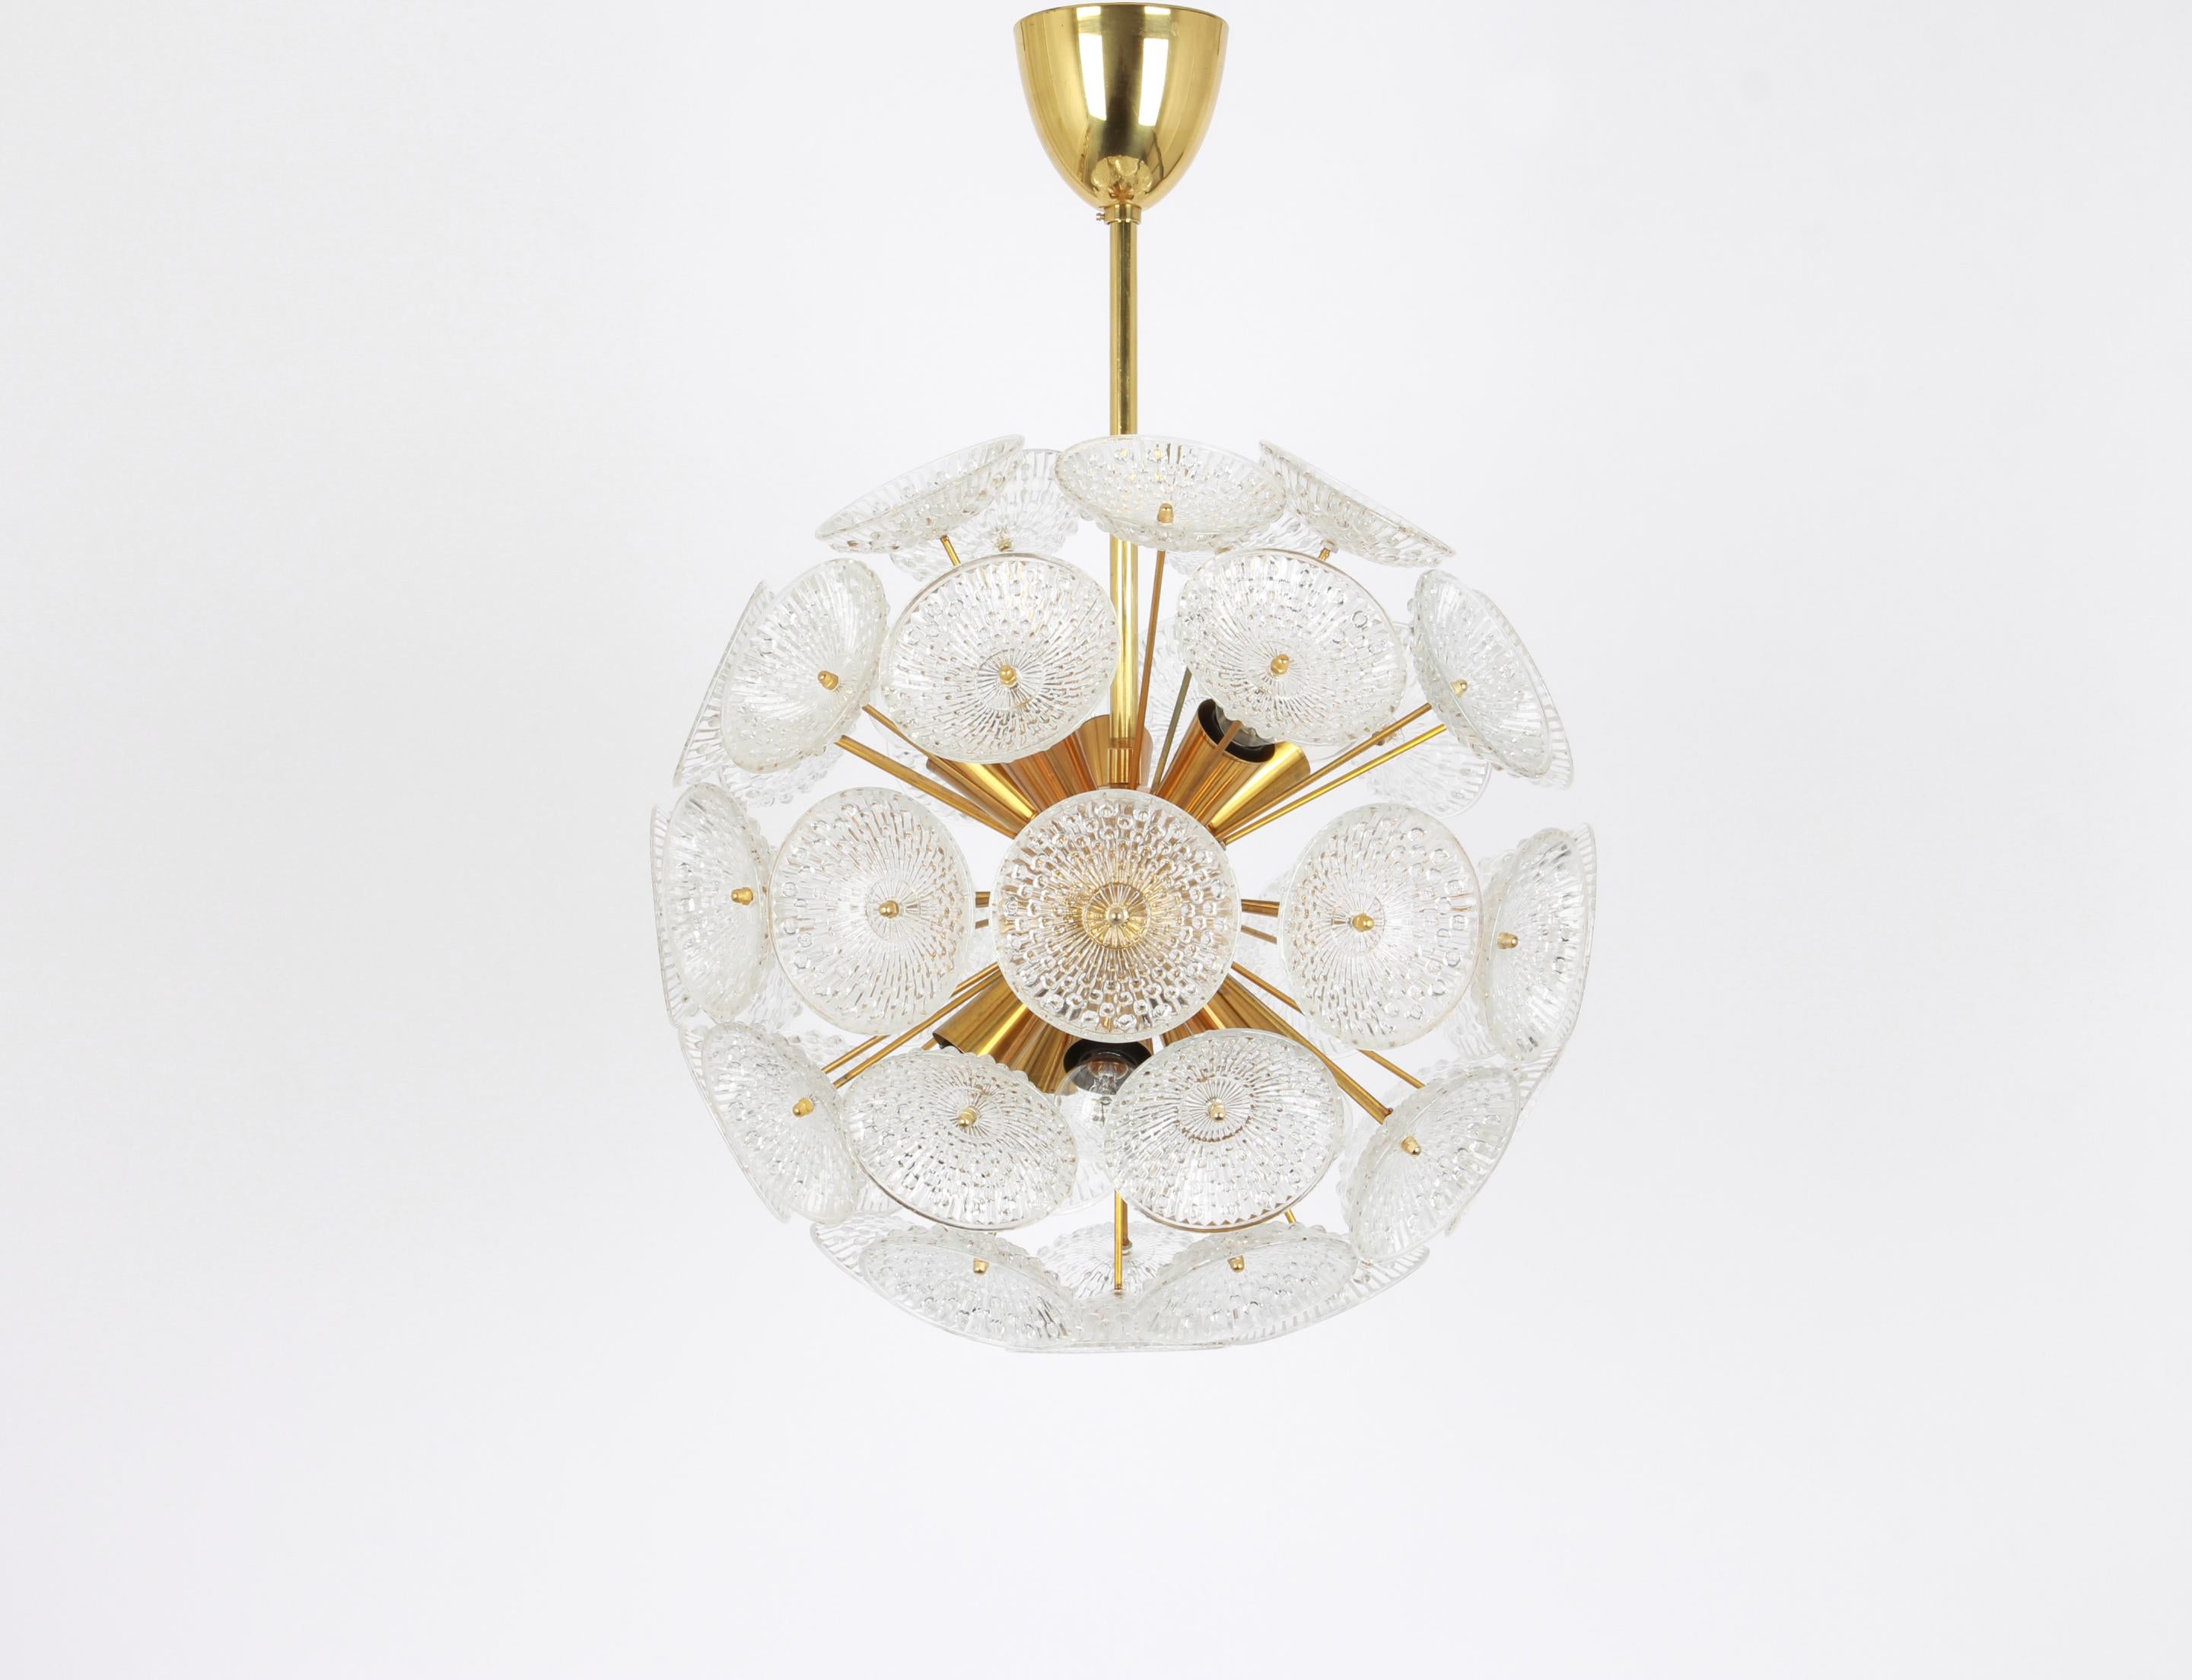 Stunning floral glass and brass Sputnik chandeliers, Germany, 1960s.

It requires 10 x E14 standard bulbs with 40W max each and compatible with the US/UK/ etc. Standards. Very good condition.
Drop rod can be adjusted as required, free of charge,